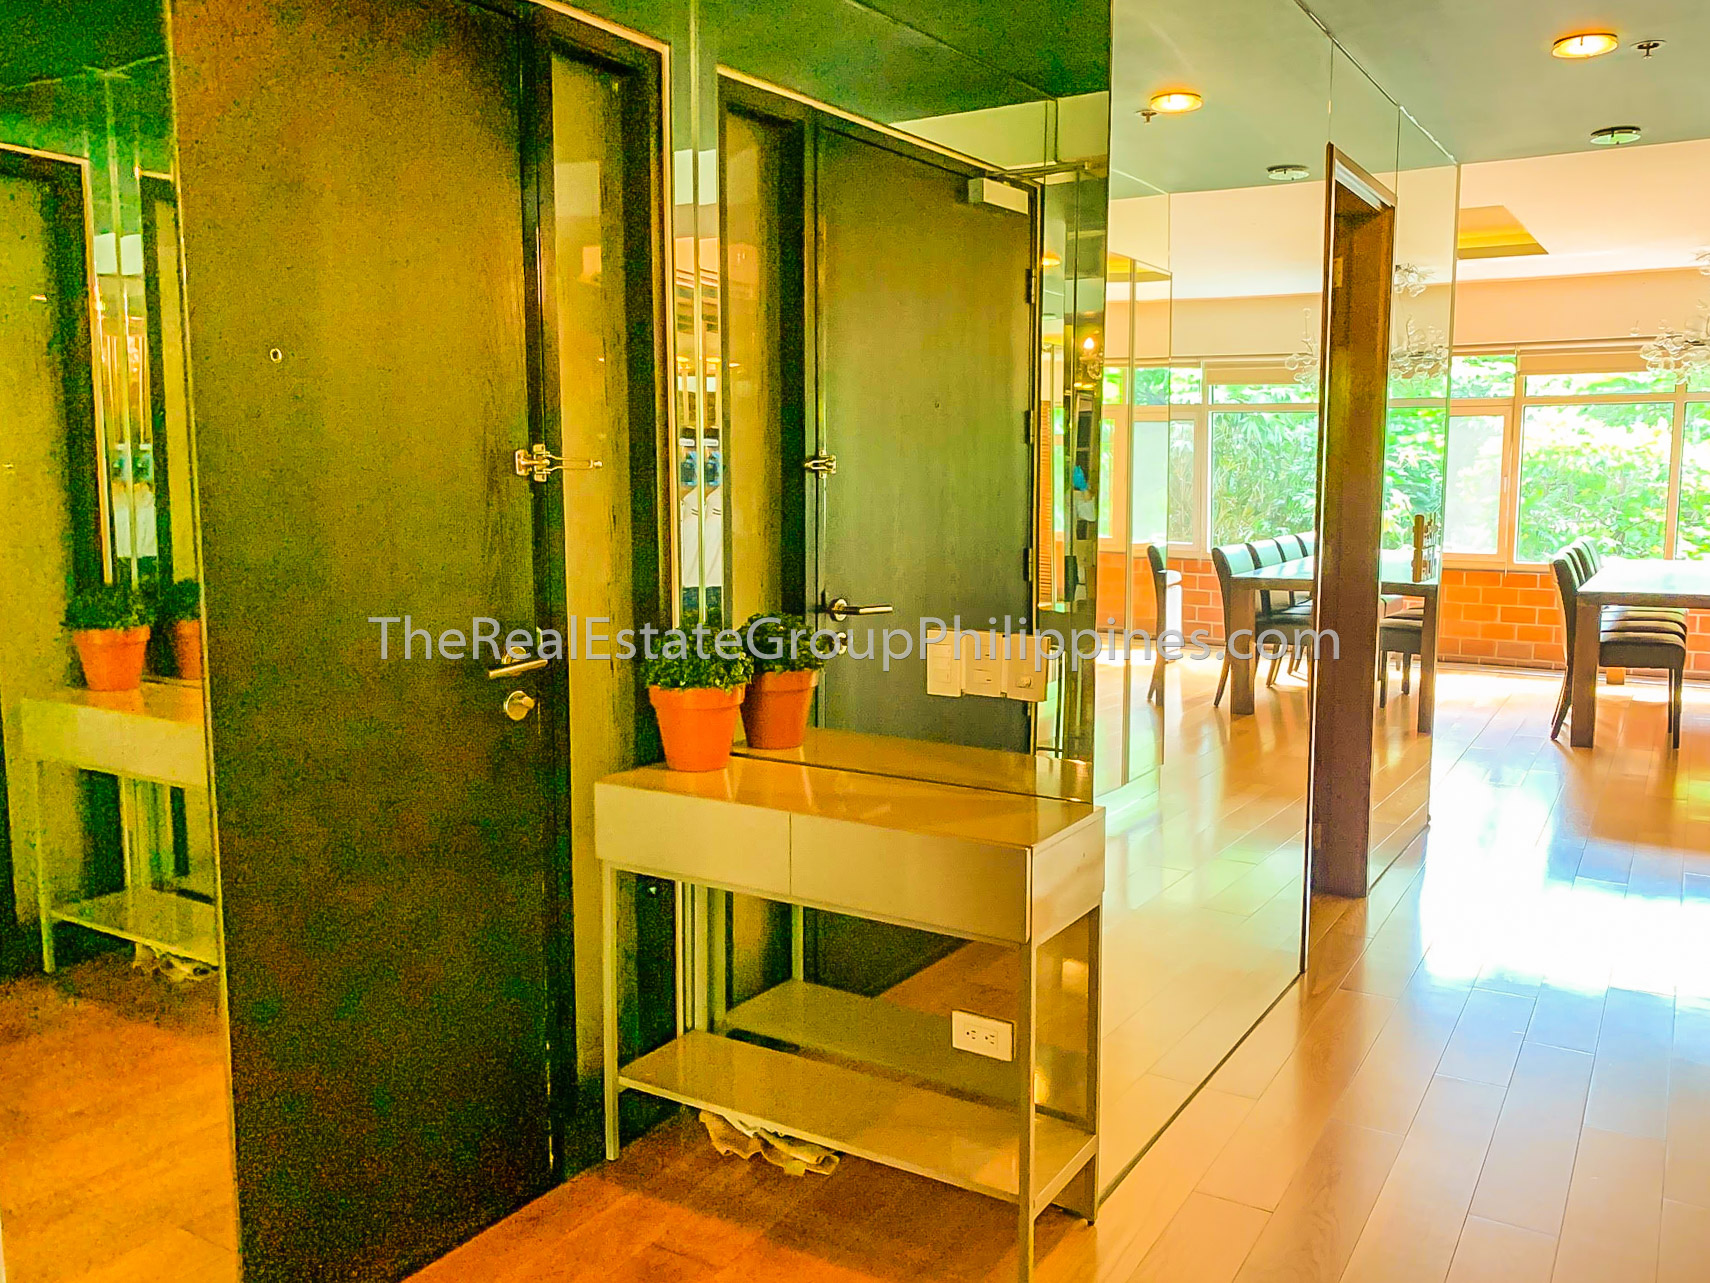 3BR Condo For Rent, Narra Tower, One Serendra, BGC (16 of 16)